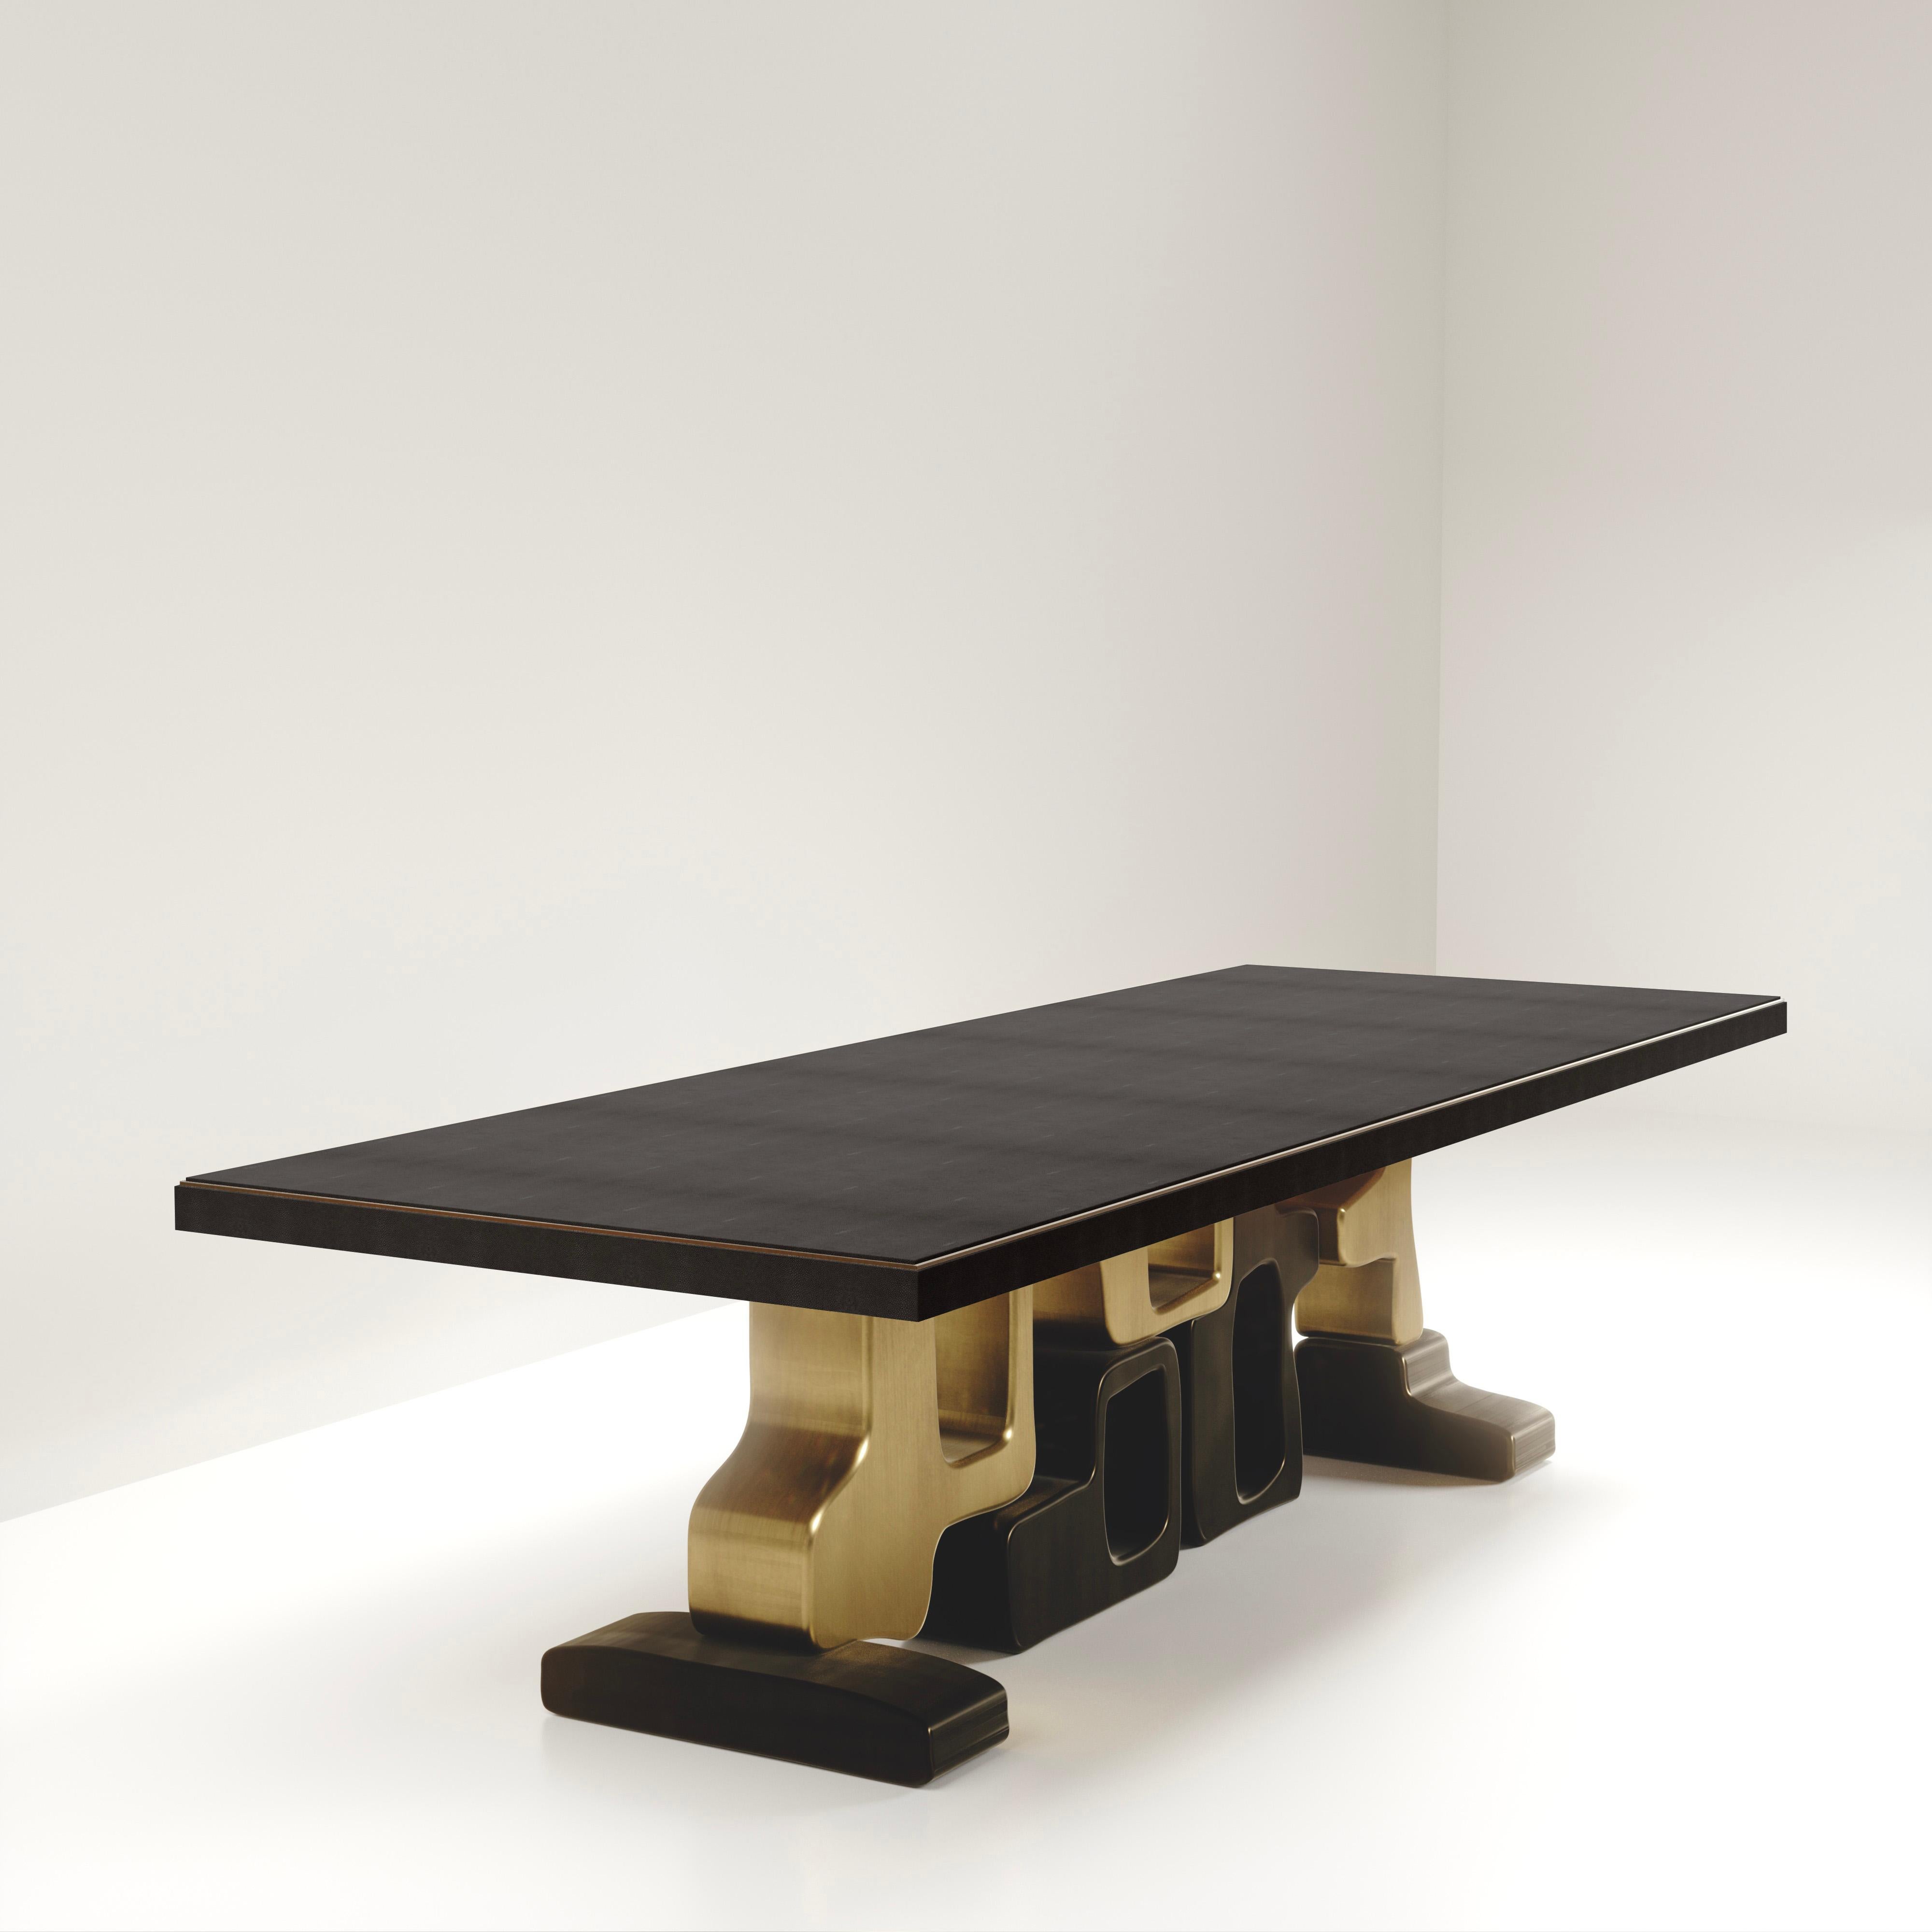 The Apoli II dining table by Kifu Paris is both dramatic and organic its unique design. The black shagreen inlaid top sits on a long clustered geometric and sculptural bronze-patina brass base. This piece is designed by Kifu Augousti the daughter of